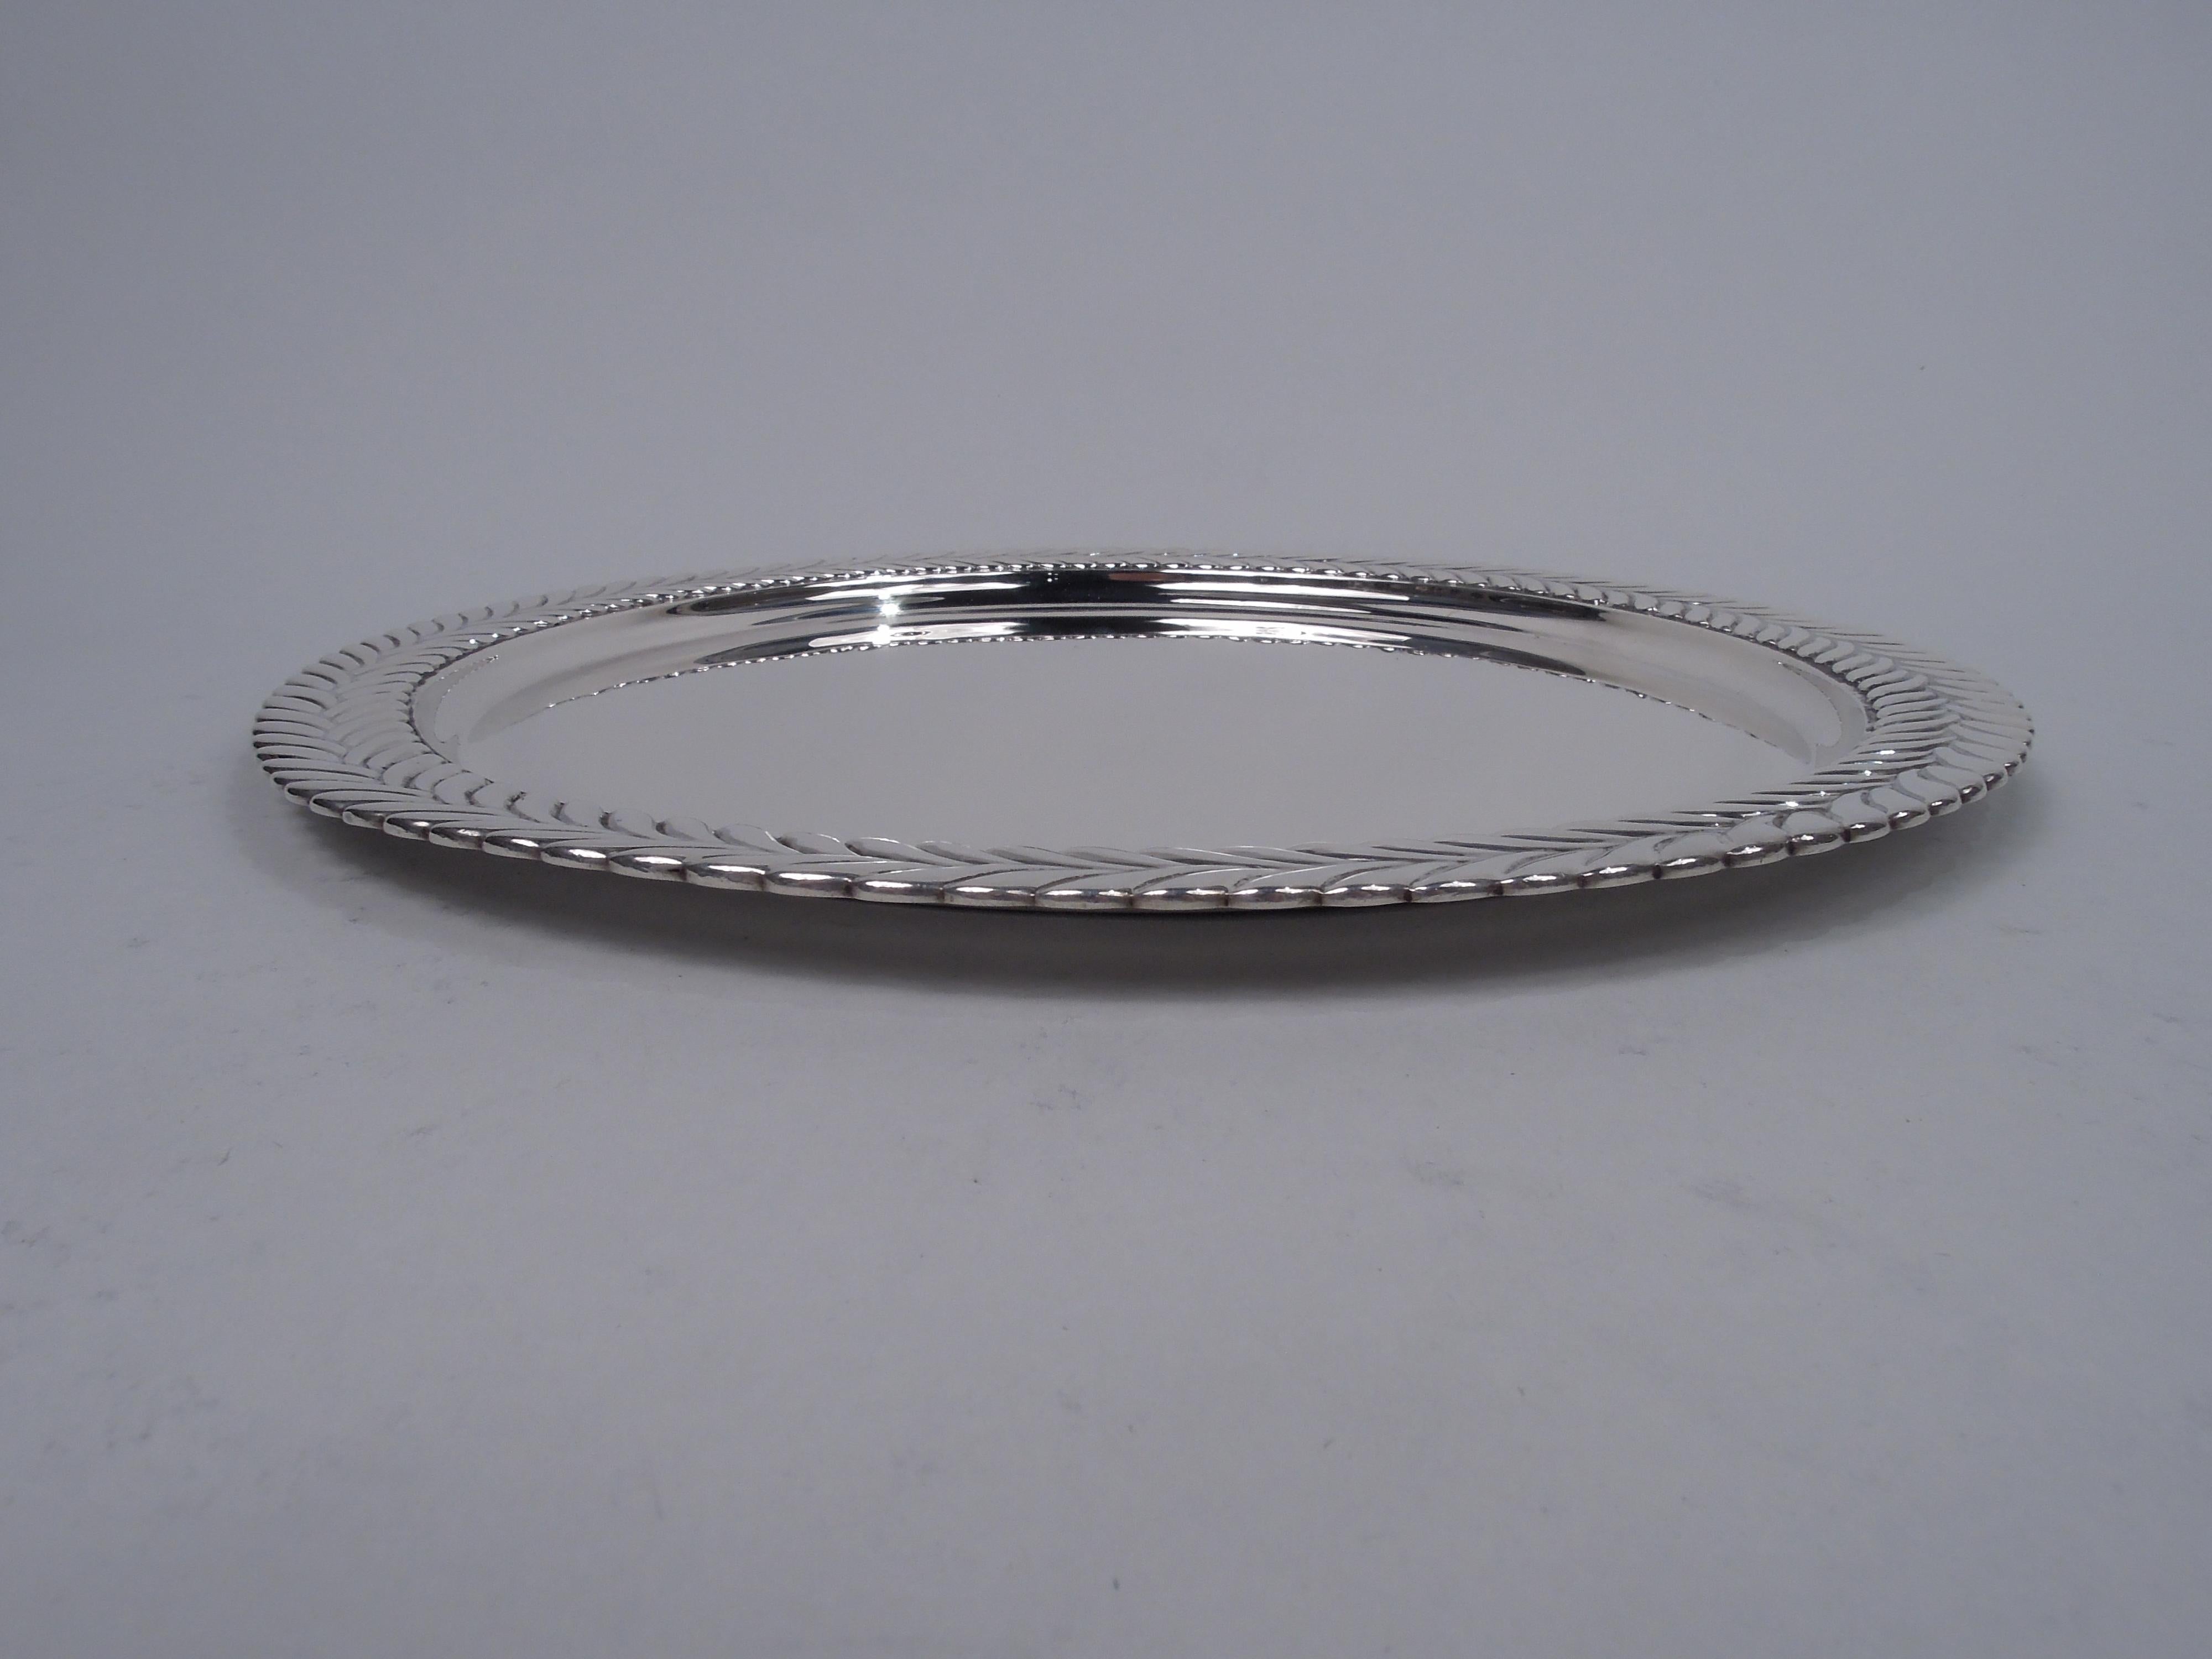 Stylish Victorian sterling silver tray. Made by Tiffany & Co. in New York. Round and plain well. Wide rim with low-relief border in form of imbricated leaves or chevrons. A popular motif that is sometimes known as Wave Edge. Fully marked including